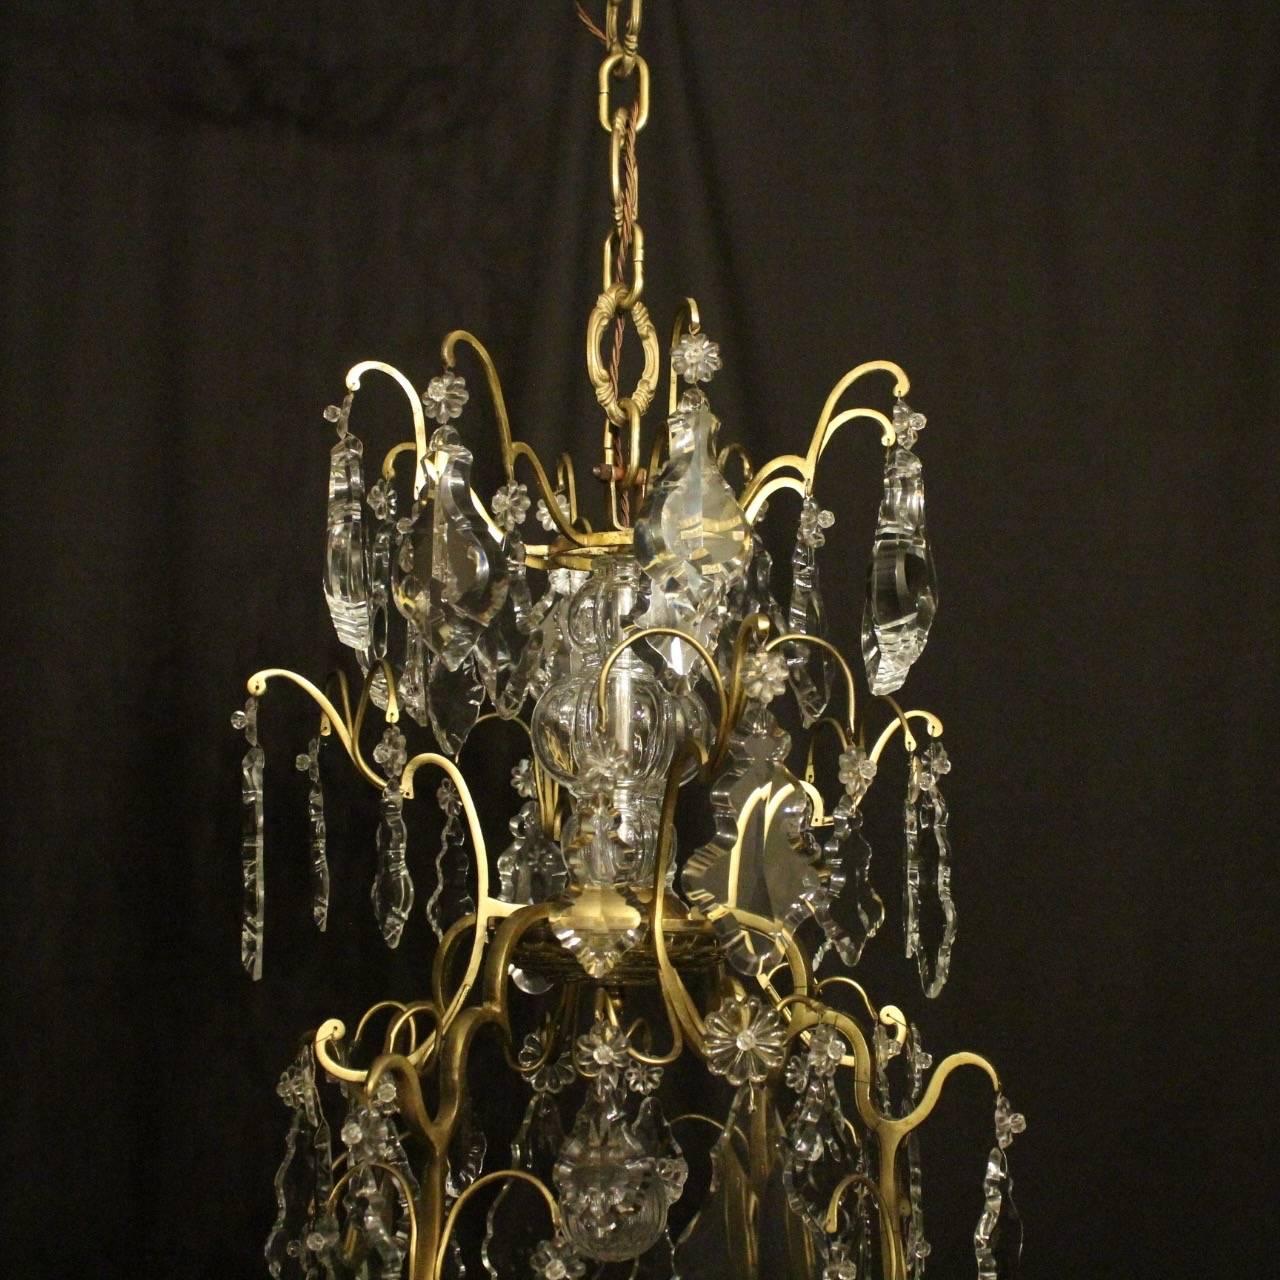 French 19th Century Gilded and Crystal Eight-Light Cage Antique Chandelier For Sale 2